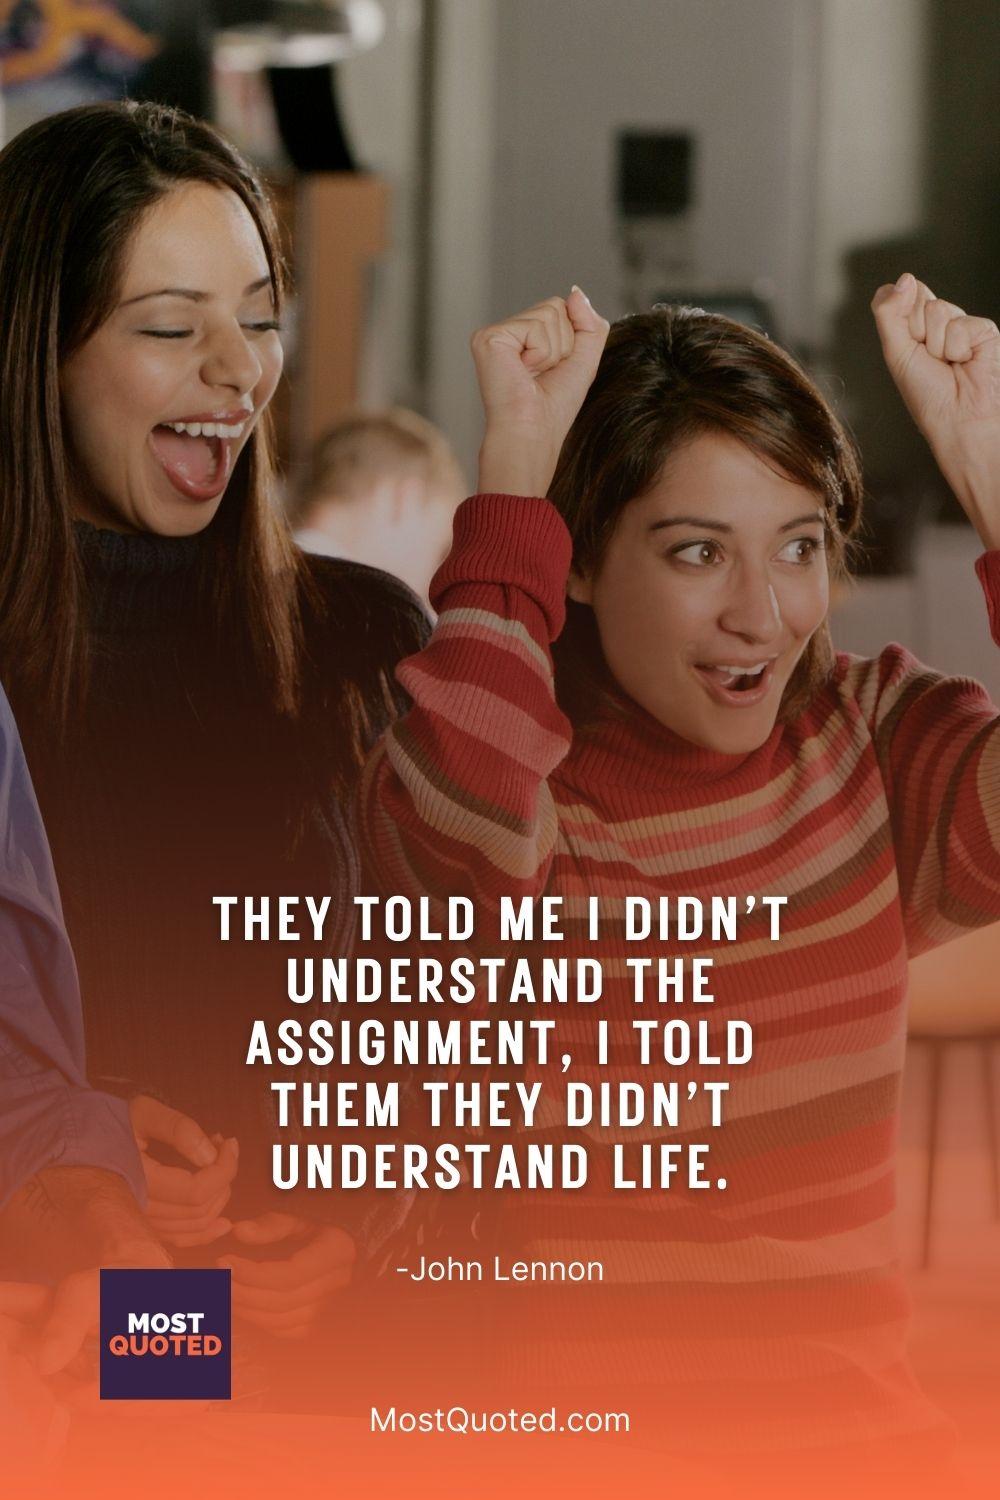 They told me I didn’t understand the assignment, I told them they didn’t understand life. - John Lennon